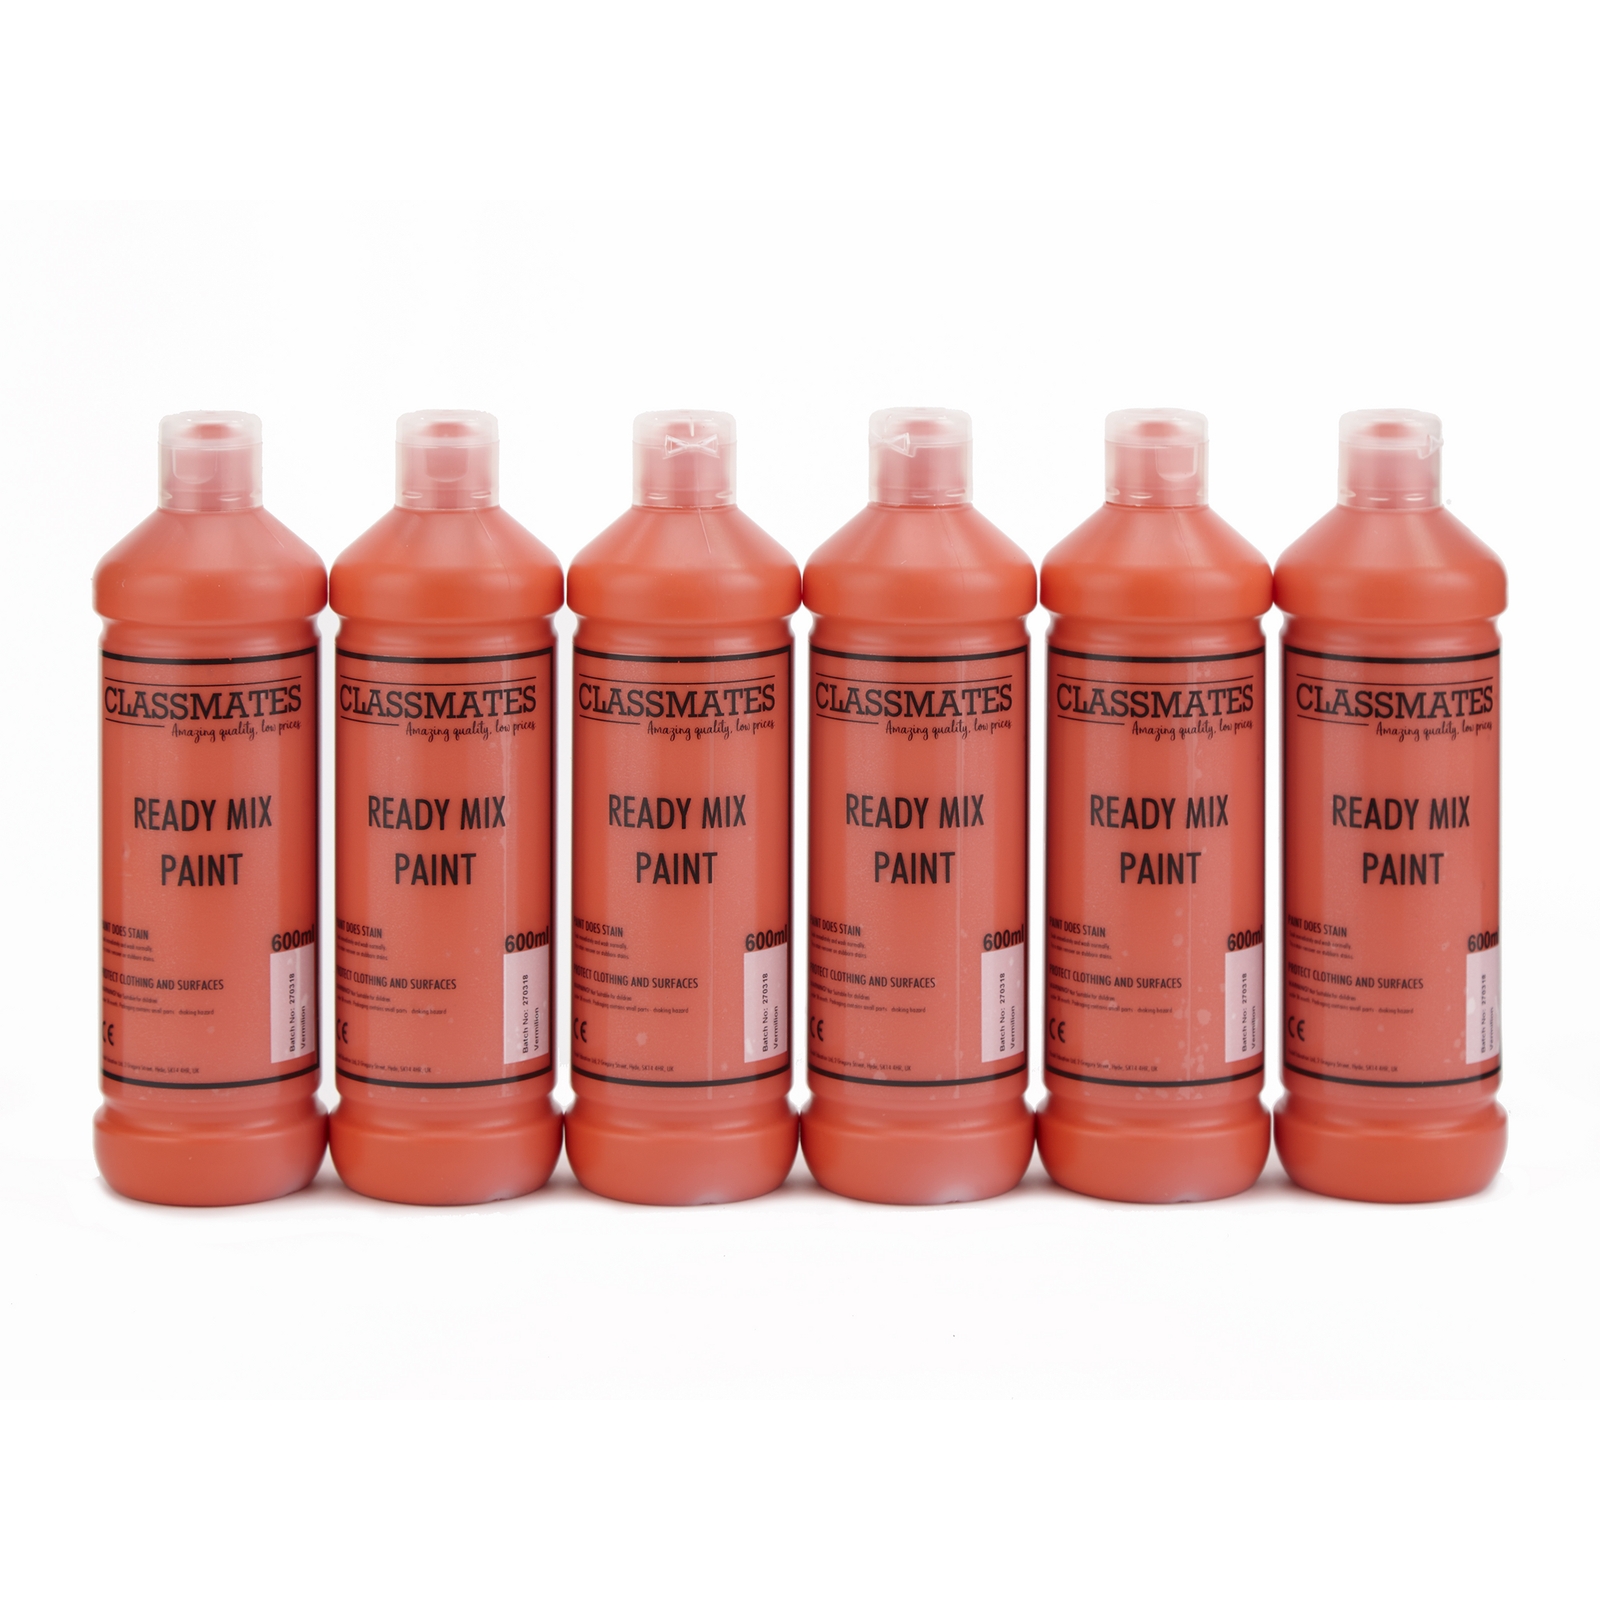 Classmates Vermilion Red Ready Mixed Paint - 600ml - Pack of 6